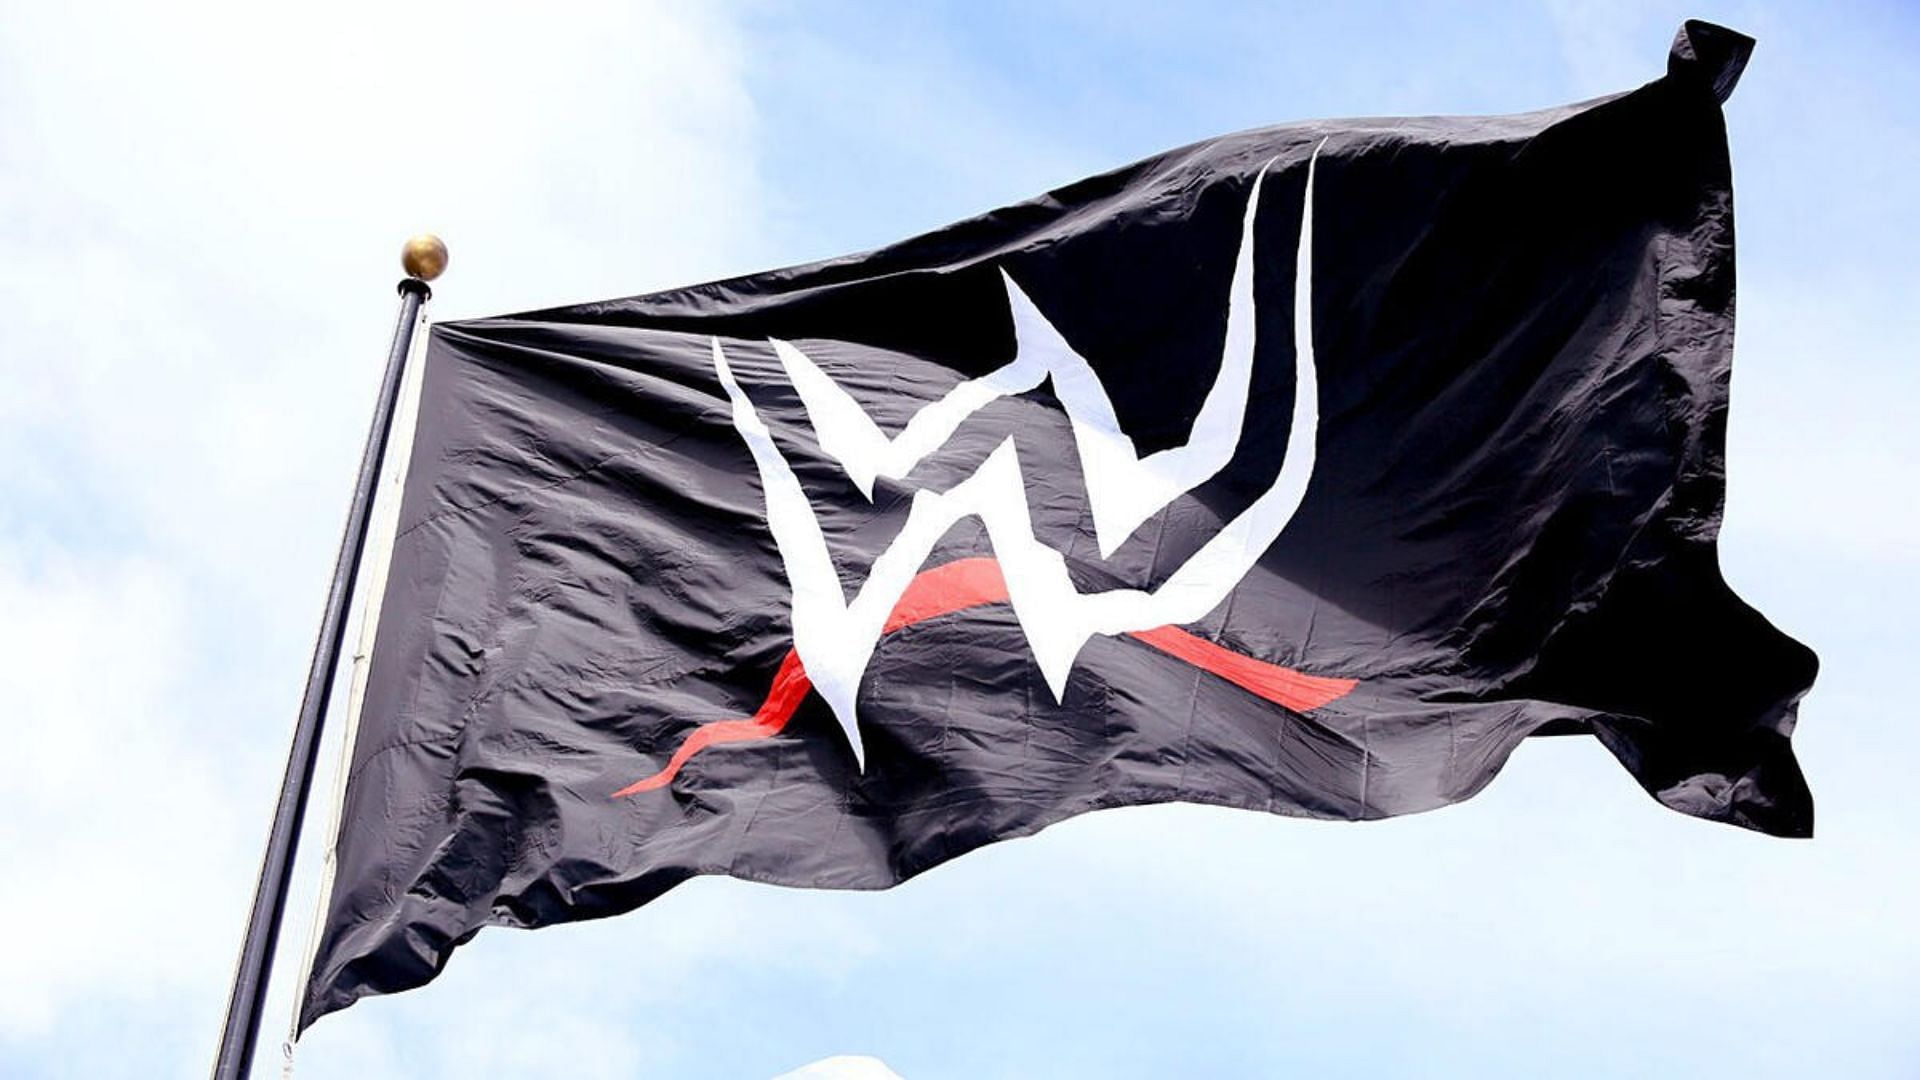 3 Draft predictions from WWE Superstars that are most likely to come true